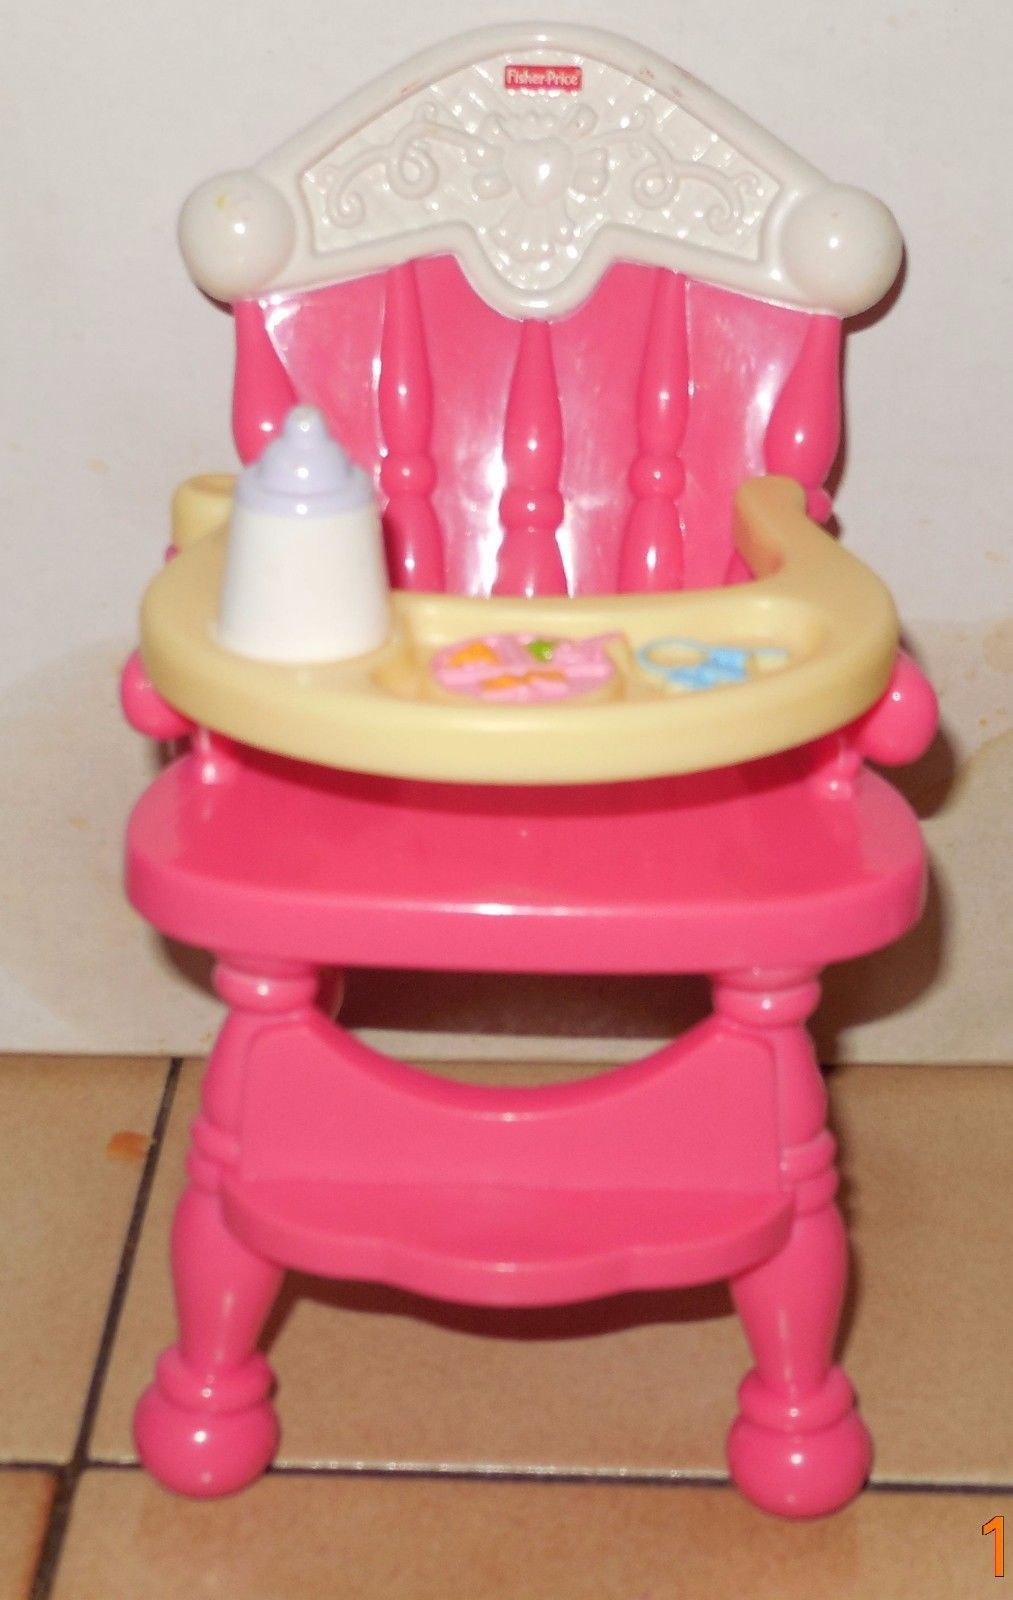 fisher price baby doll high chair